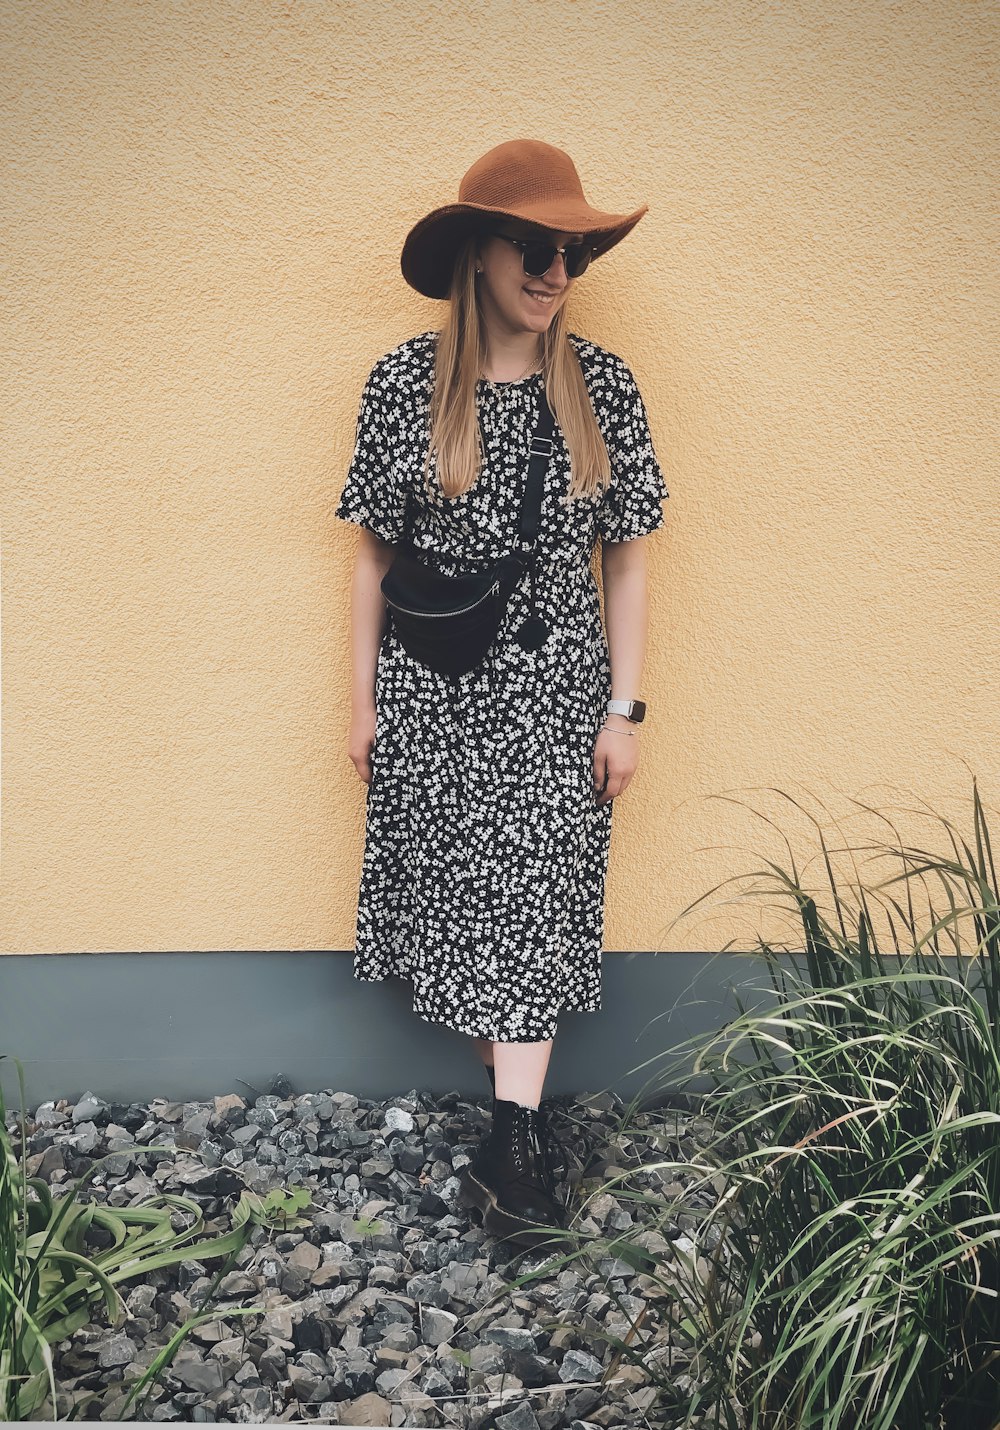 woman in black and white polka dot dress wearing brown sun hat standing beside green plants